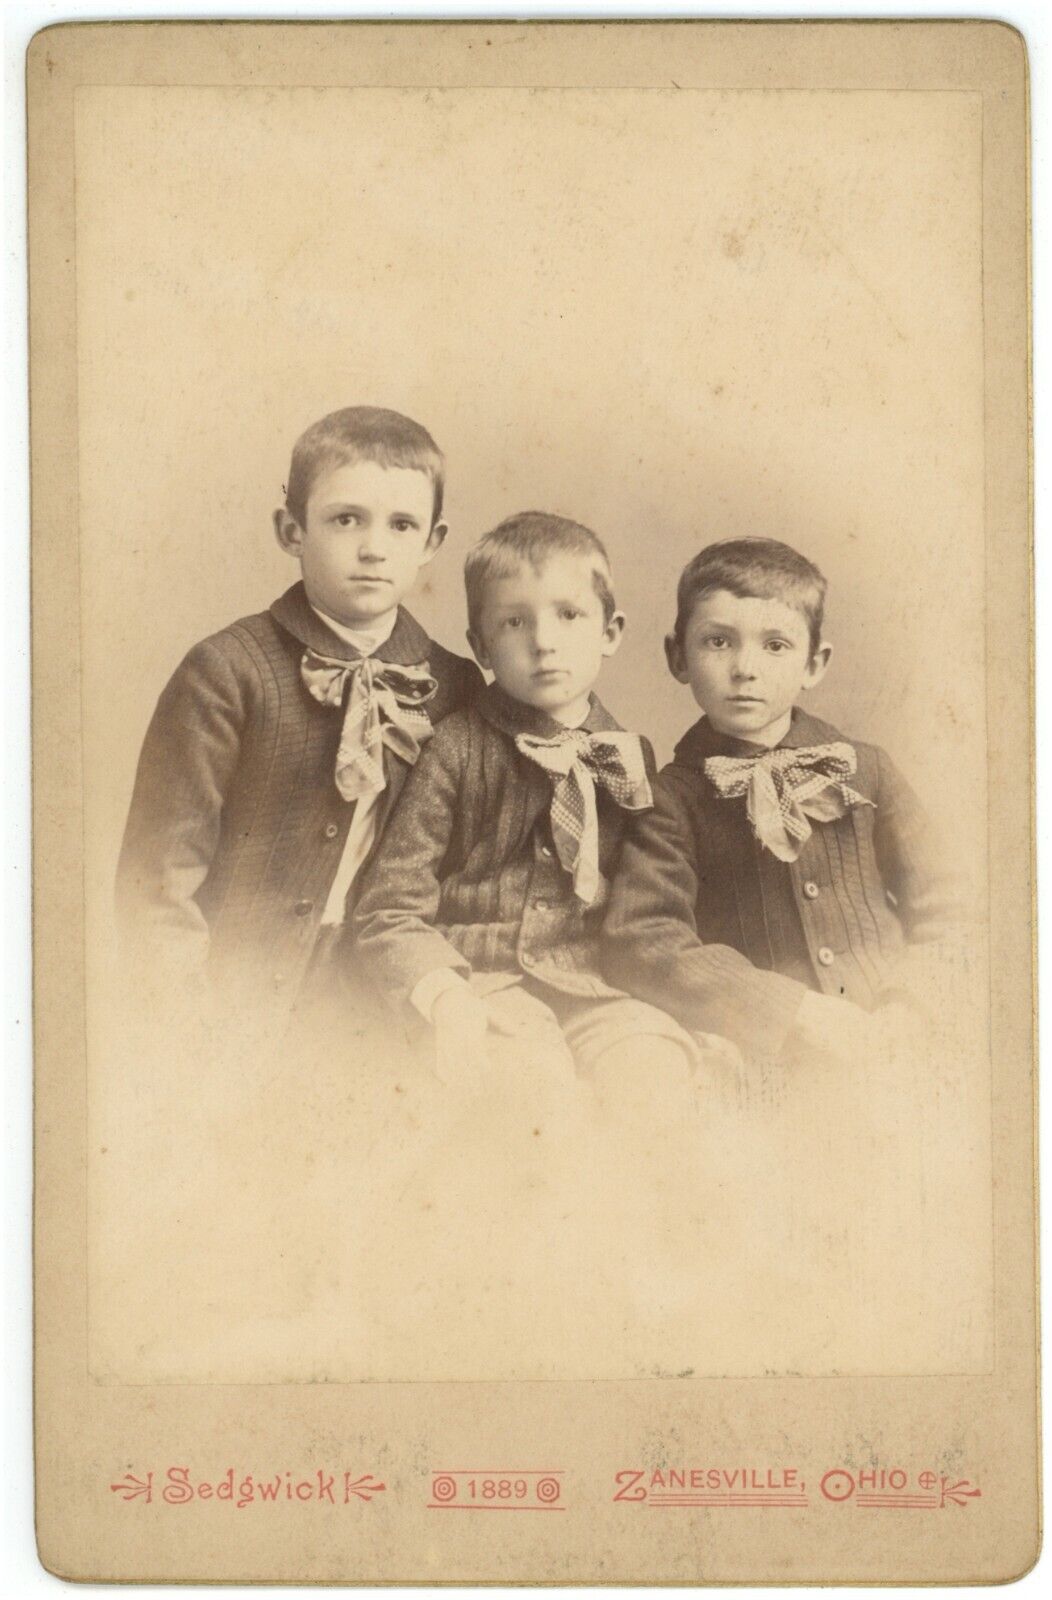 Antique c1880s Cabinet Card Sedgwick Three Adorable Boys in Suits Zanesville, OH